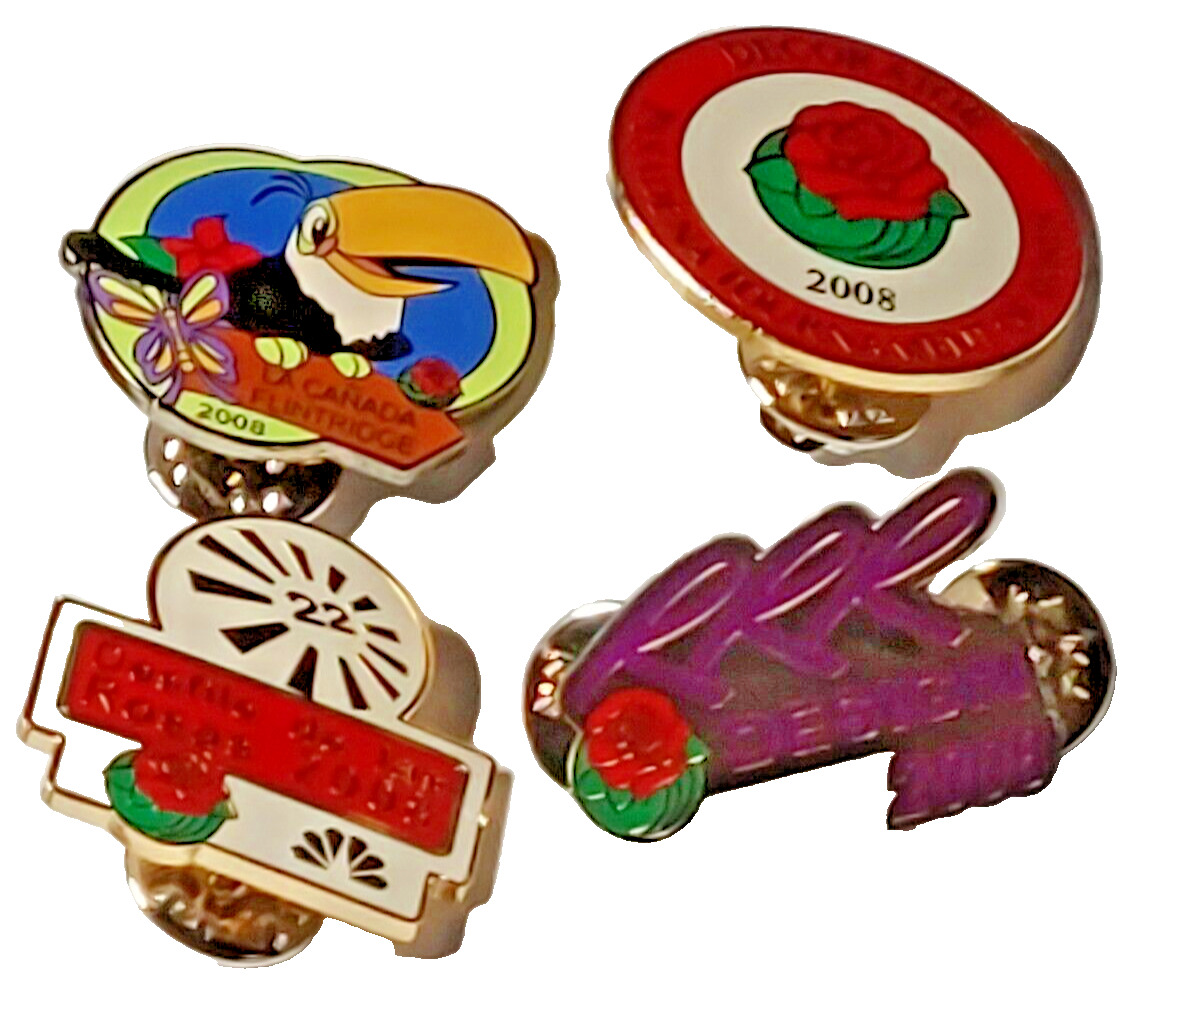 Rose Parade 2008 119th Tournament of Roses Lot of 4 Lapel Pins (102)